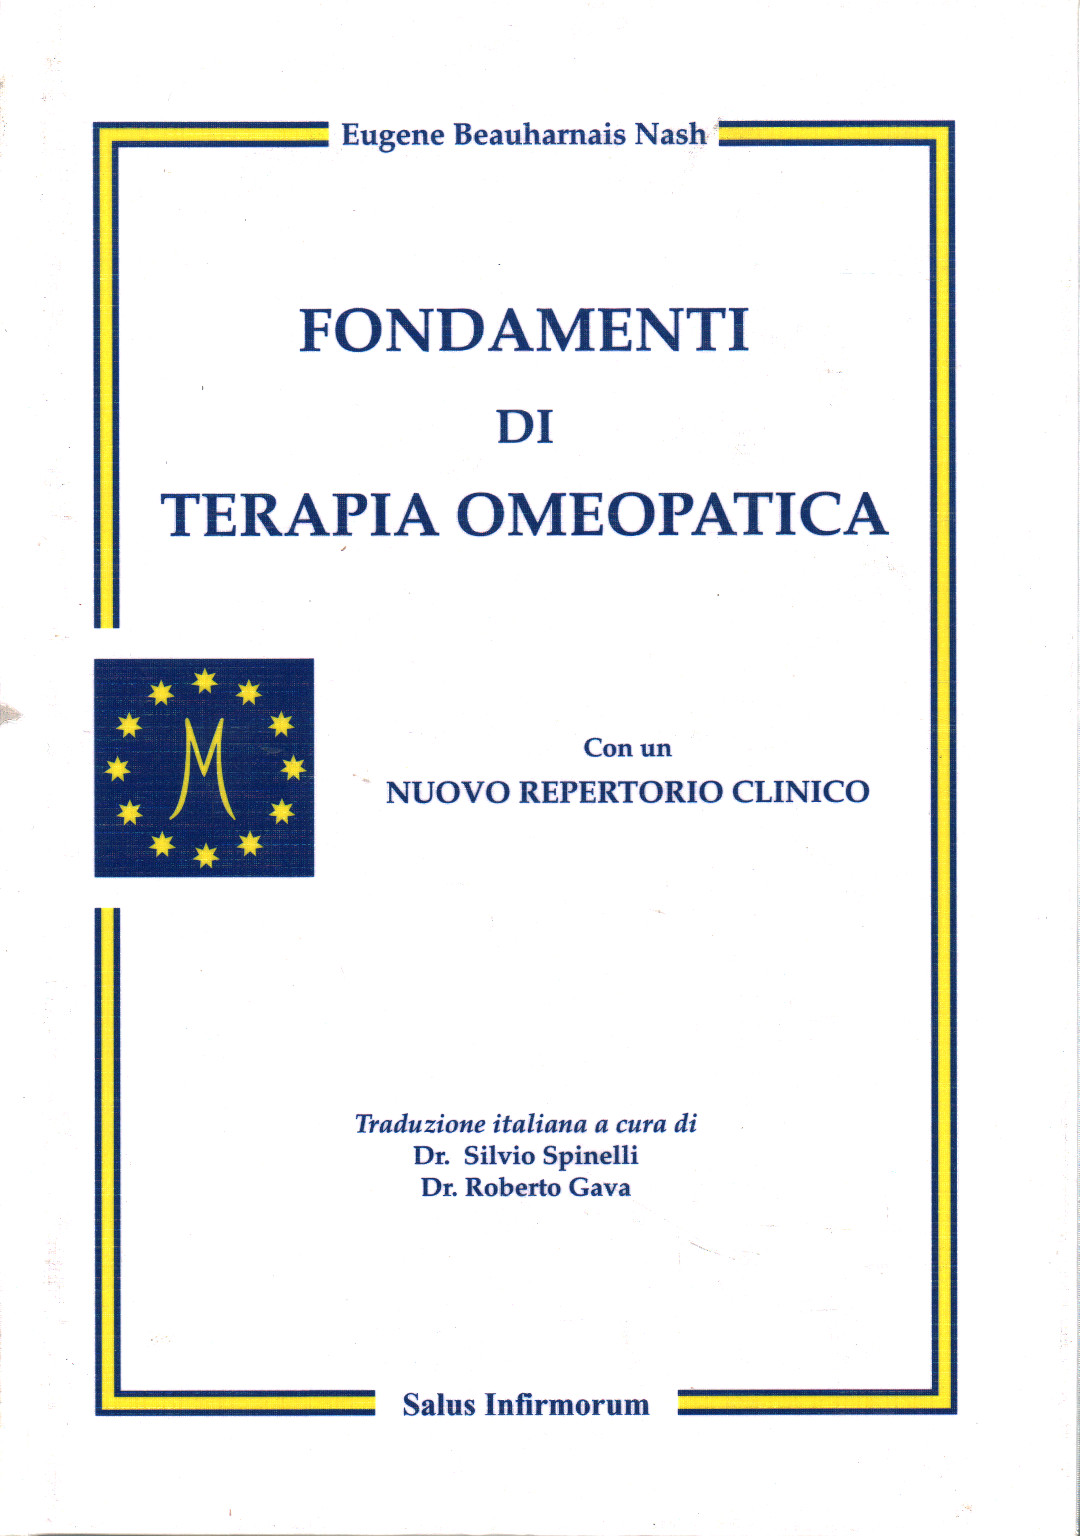 Fundamentals of Homeopathic Therapy, Eugene Beauharnais Nash